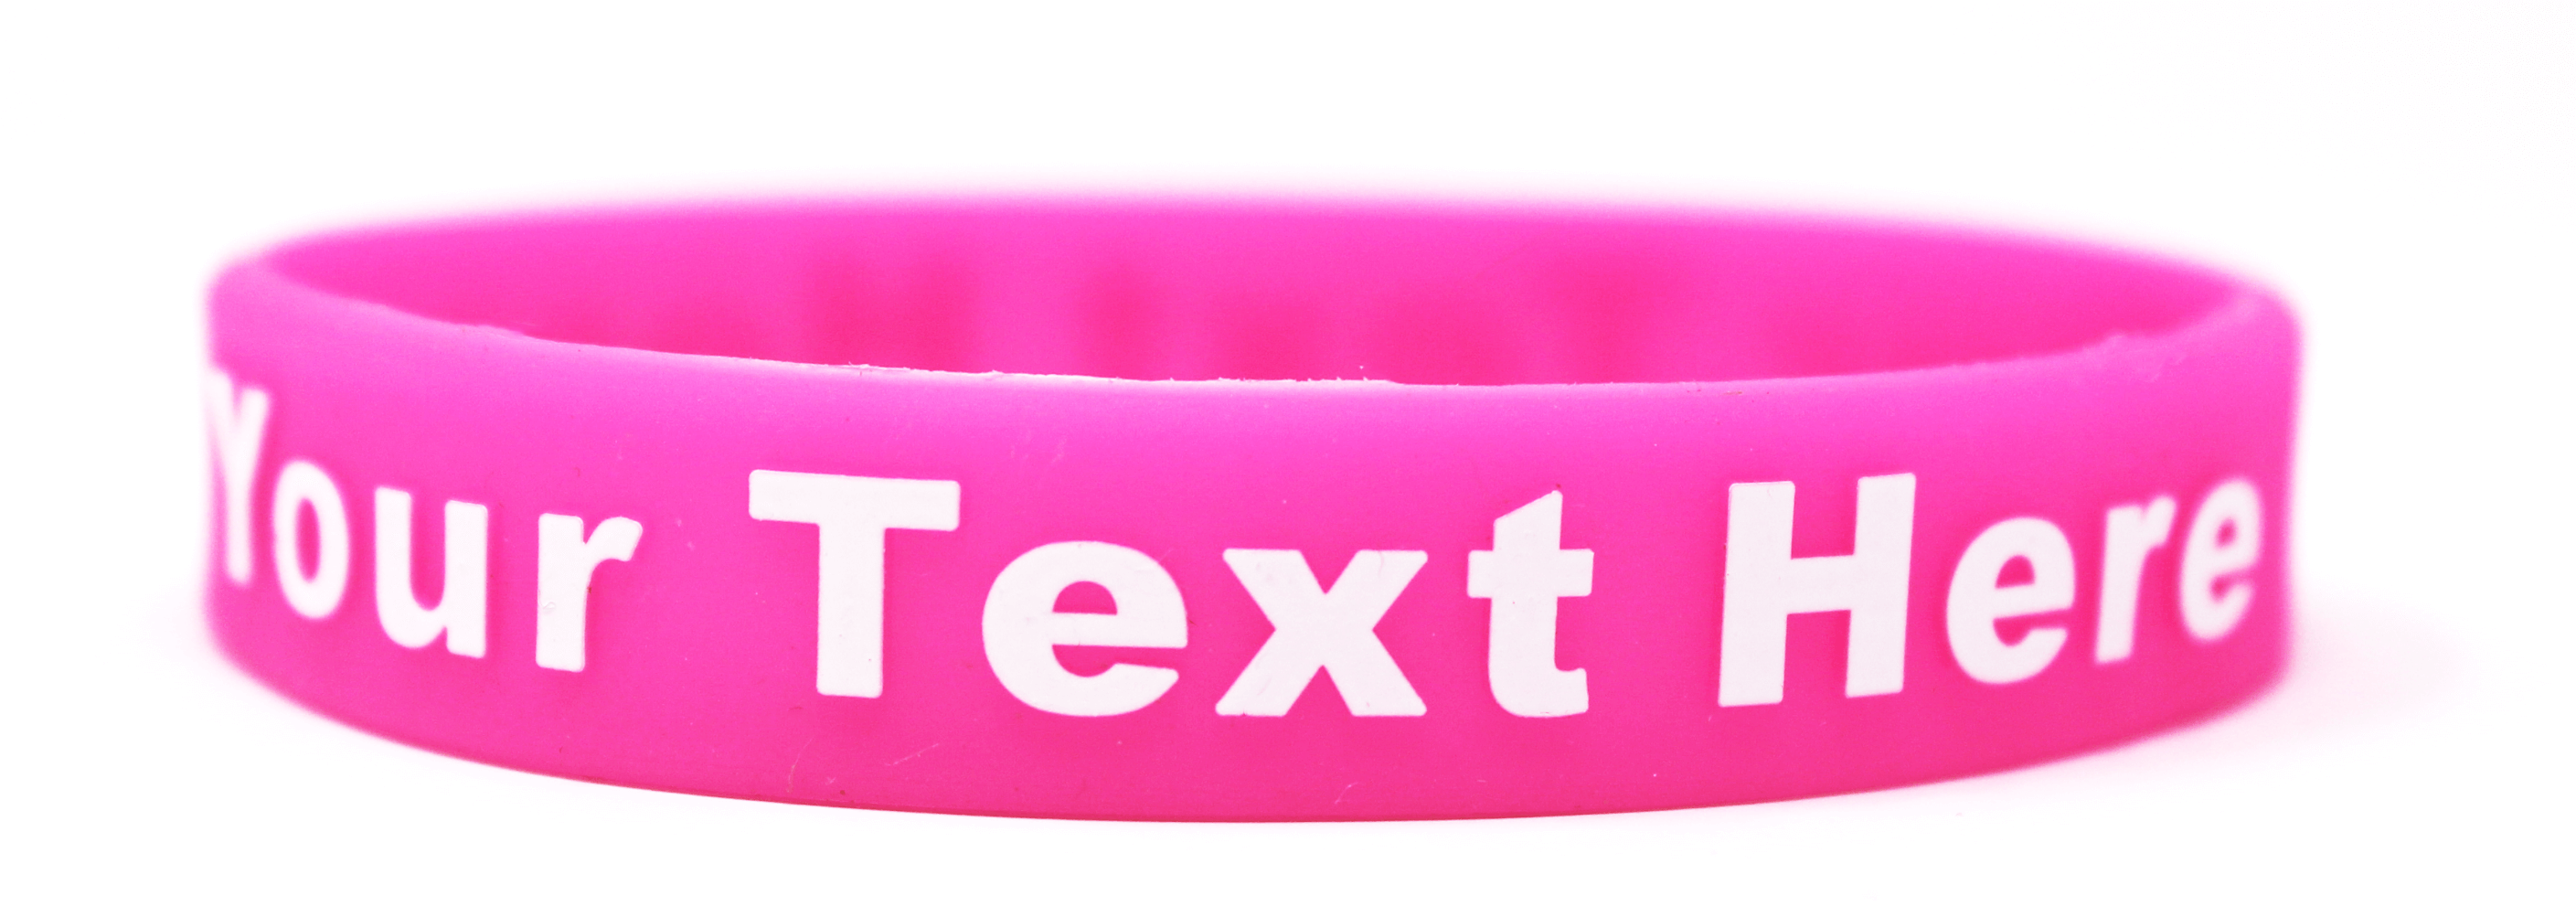 Hot pink wristband represents inflammatory break cancer, stop gendercide, and more